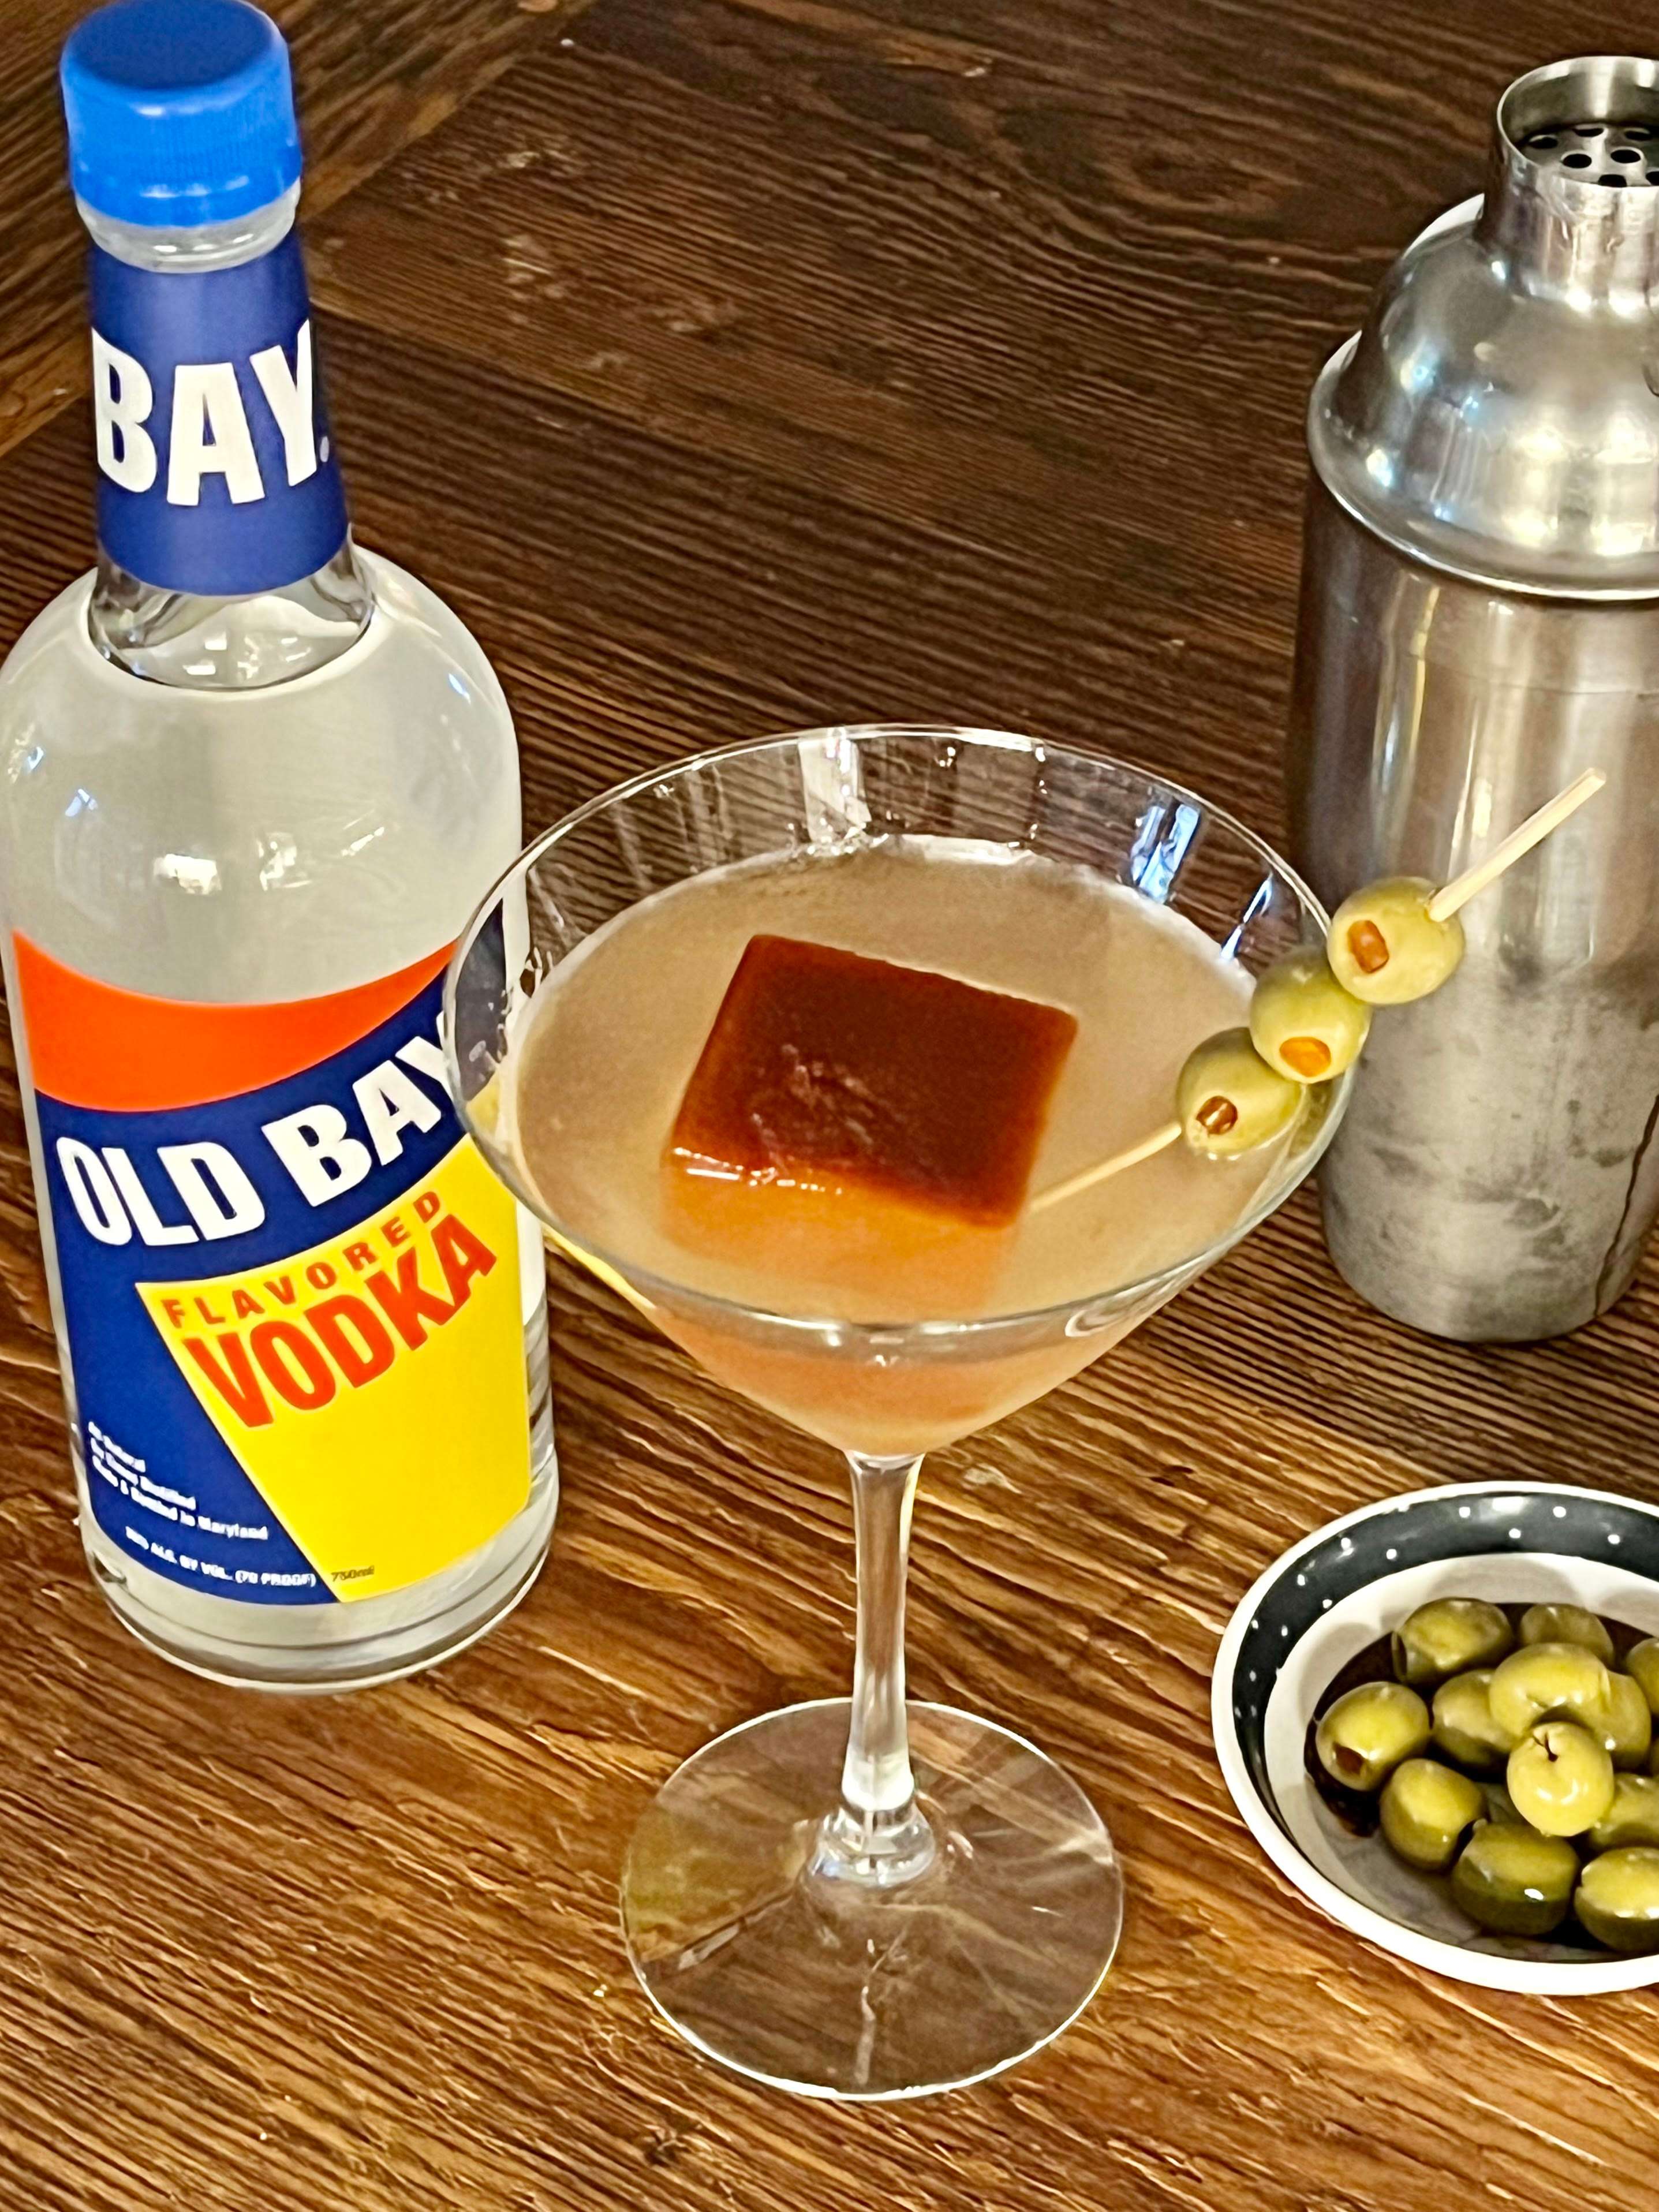 martini glass with olives and old bay vodka bottle